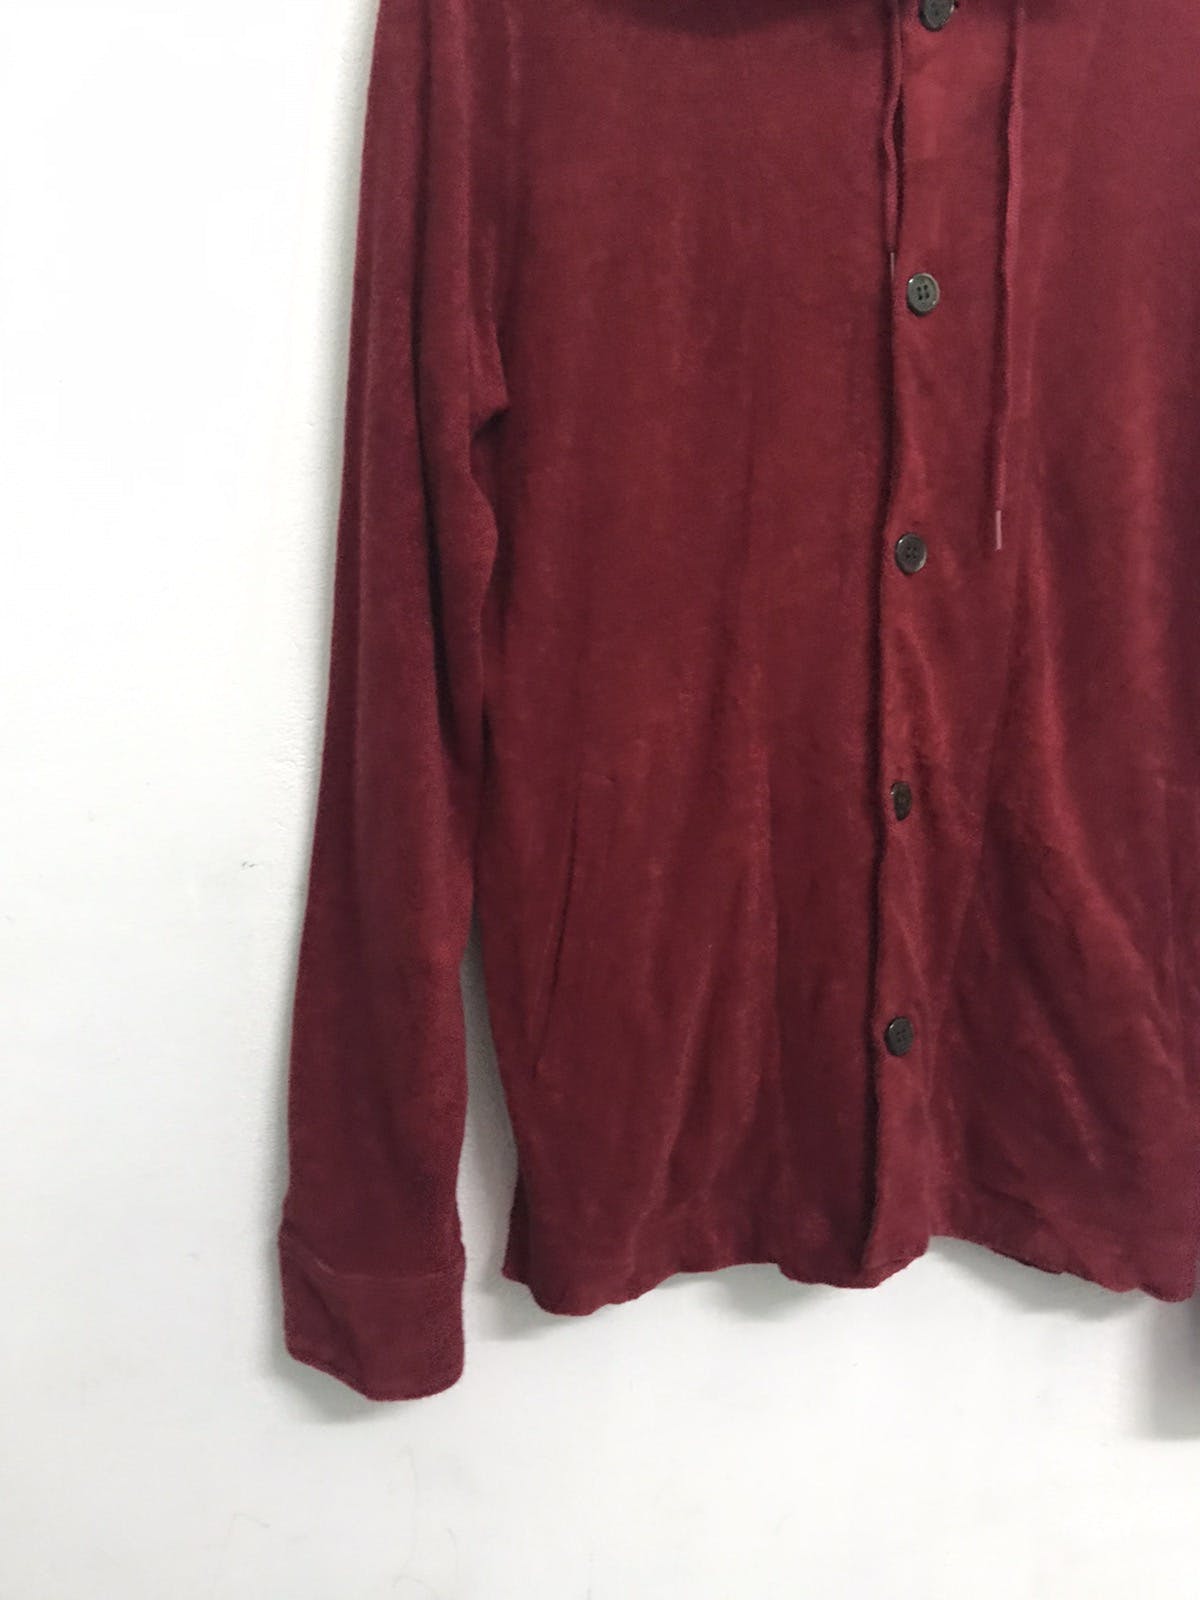 Paul Smith Button Up Hoodie Jacket Made in Japan - 5